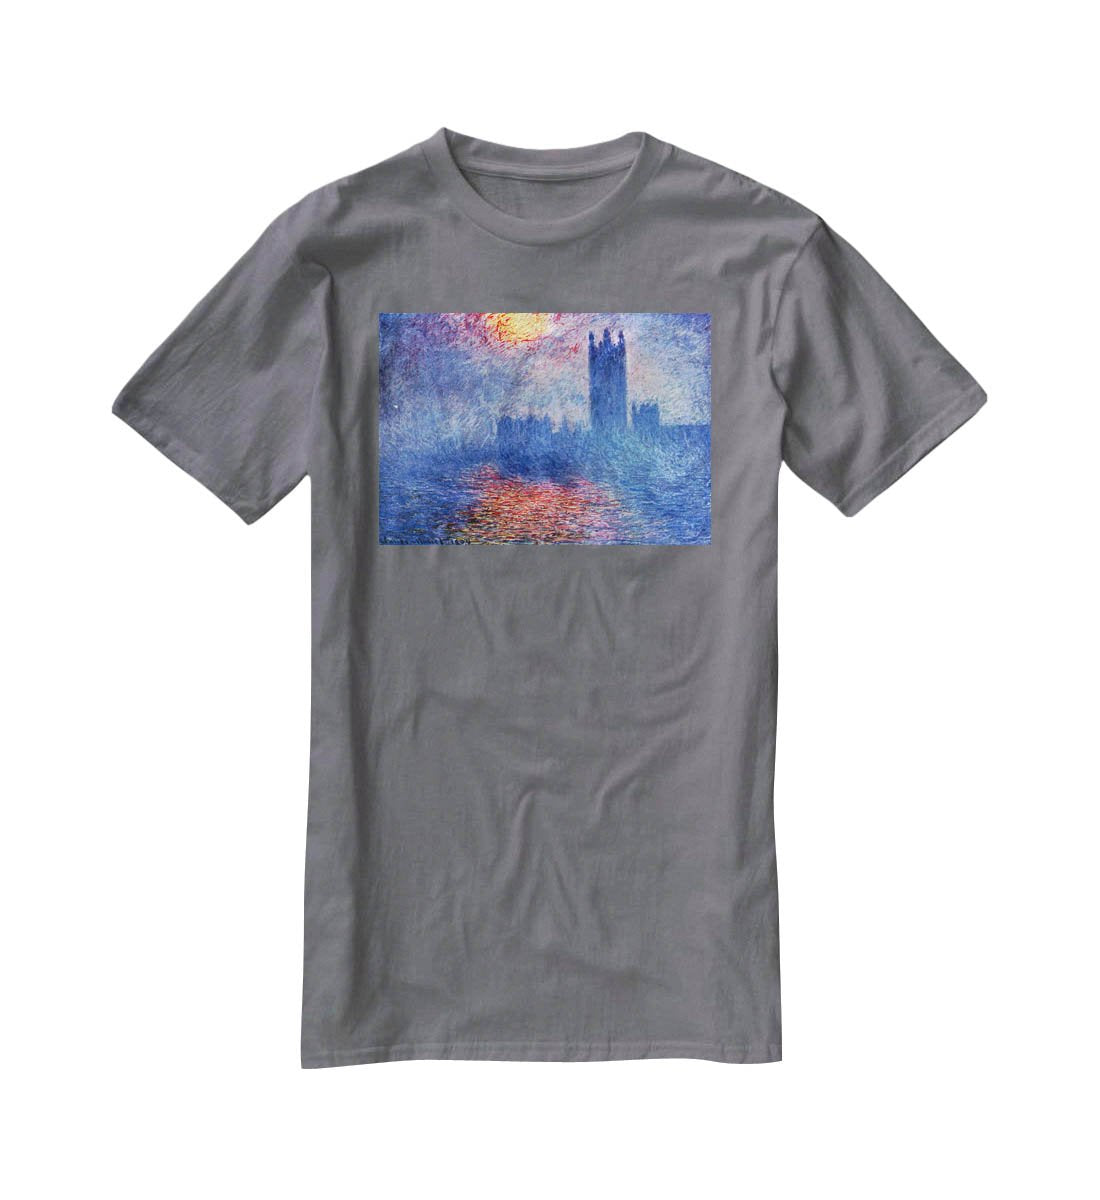 The Parlaiment in London by Monet T-Shirt - Canvas Art Rocks - 3